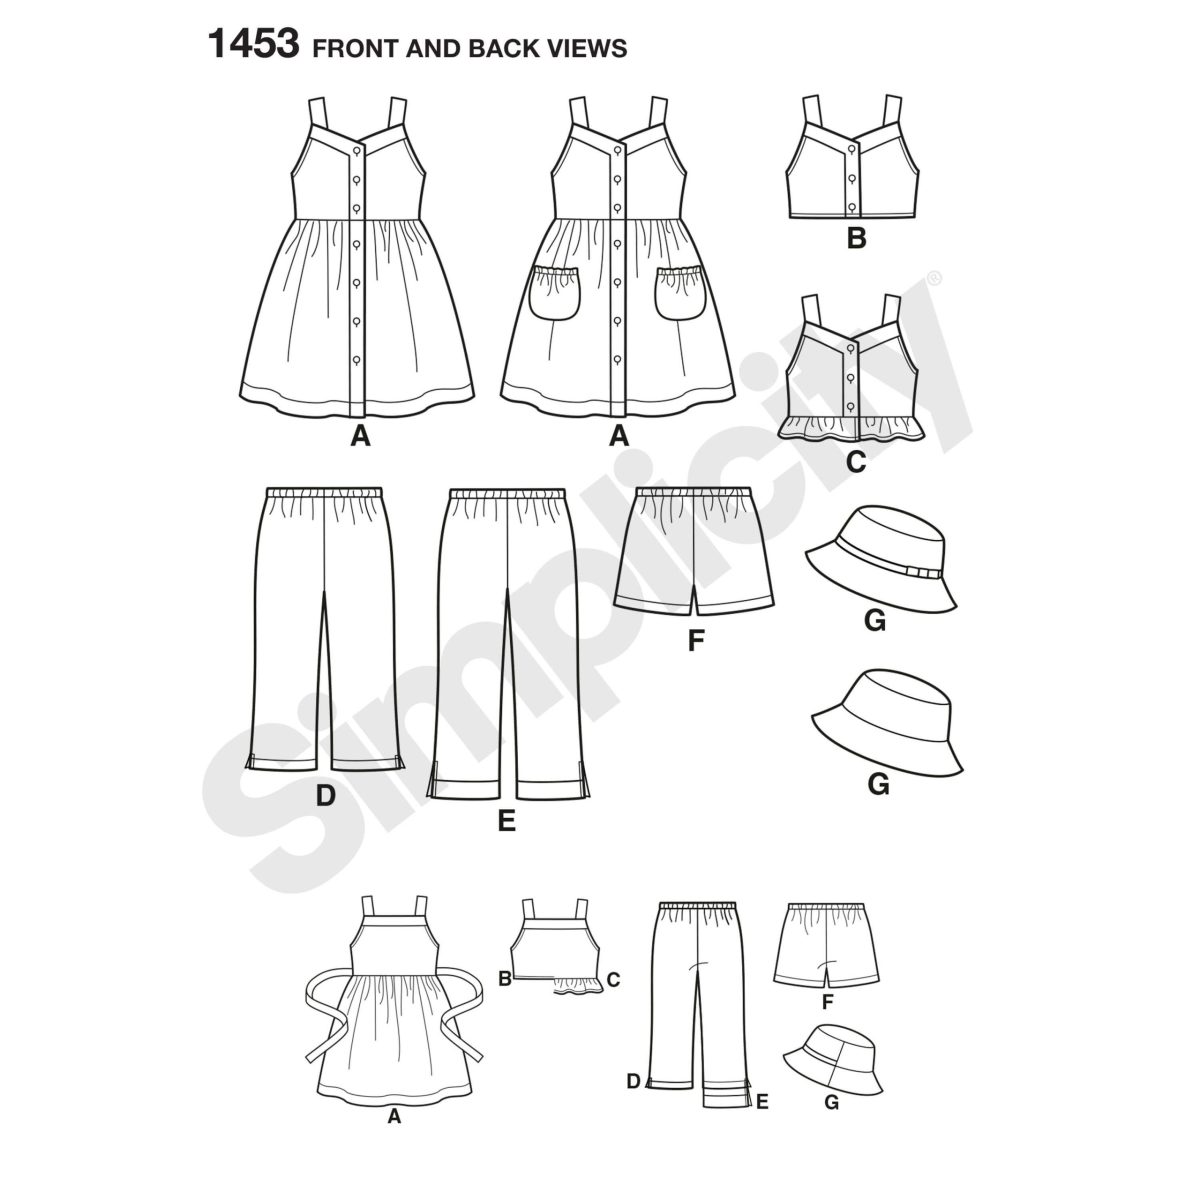 Simplicity Sewing Pattern 1453 Child's Dress, Top, Trousers or Shorts and Hat